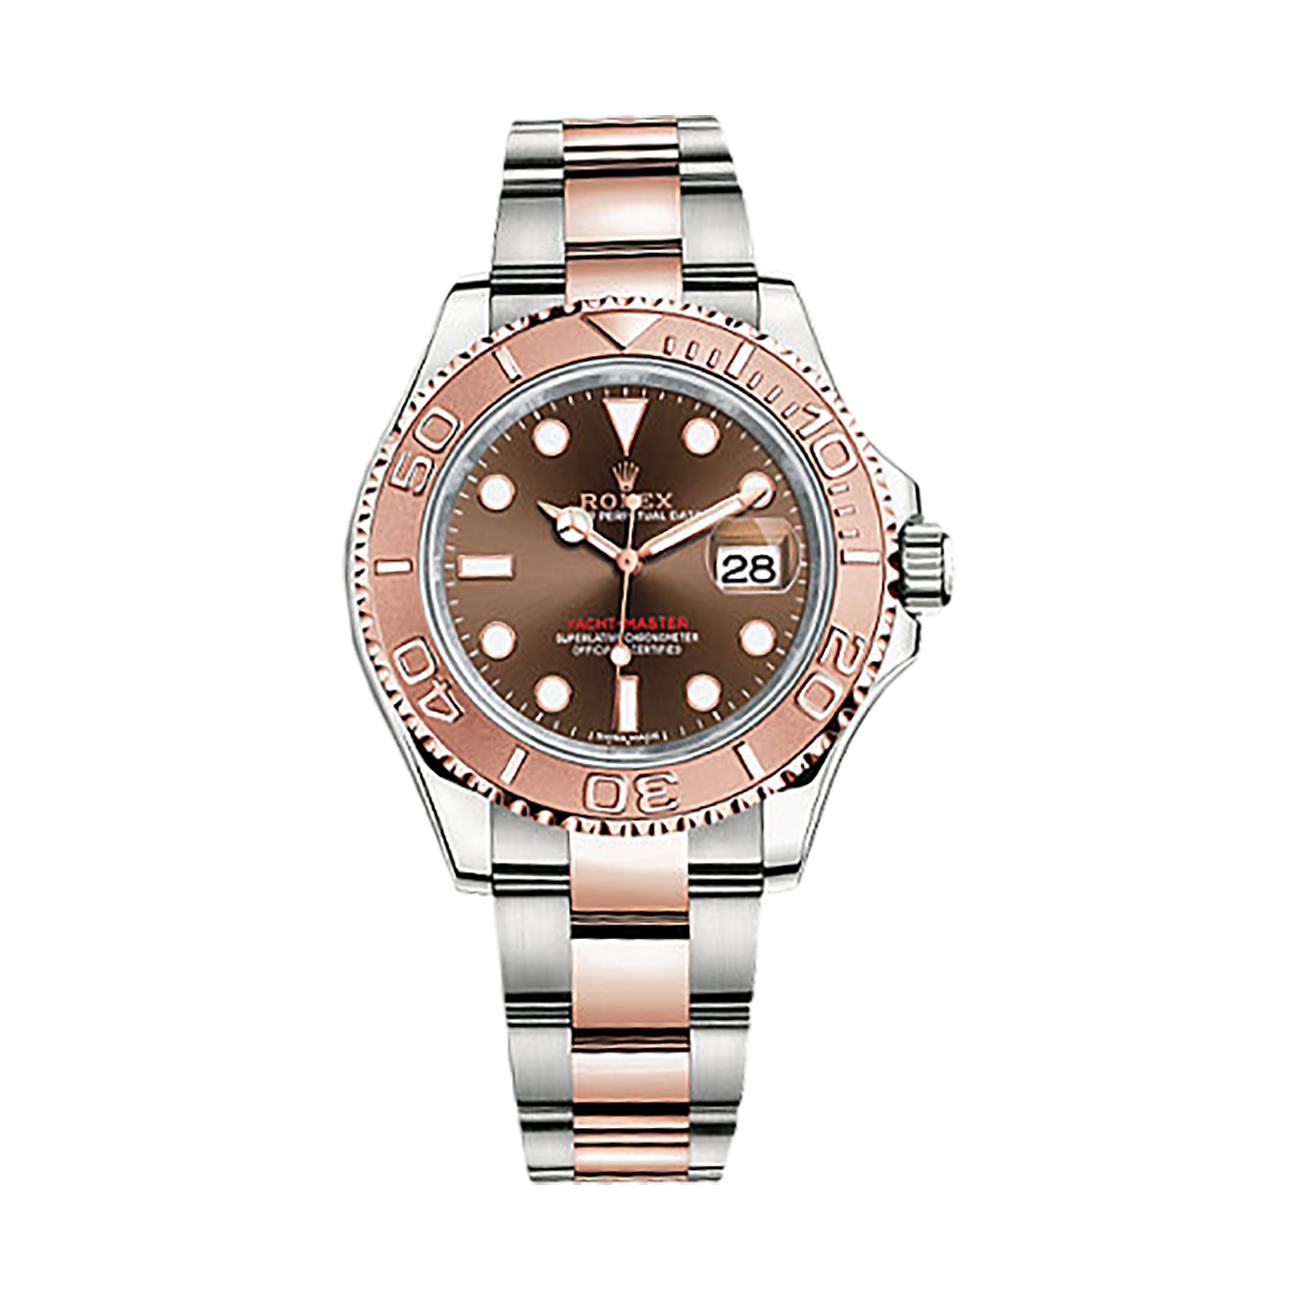 Yacht-Master 40 116621 Rose Gold & Stainless Steel Watch (Chocolate)